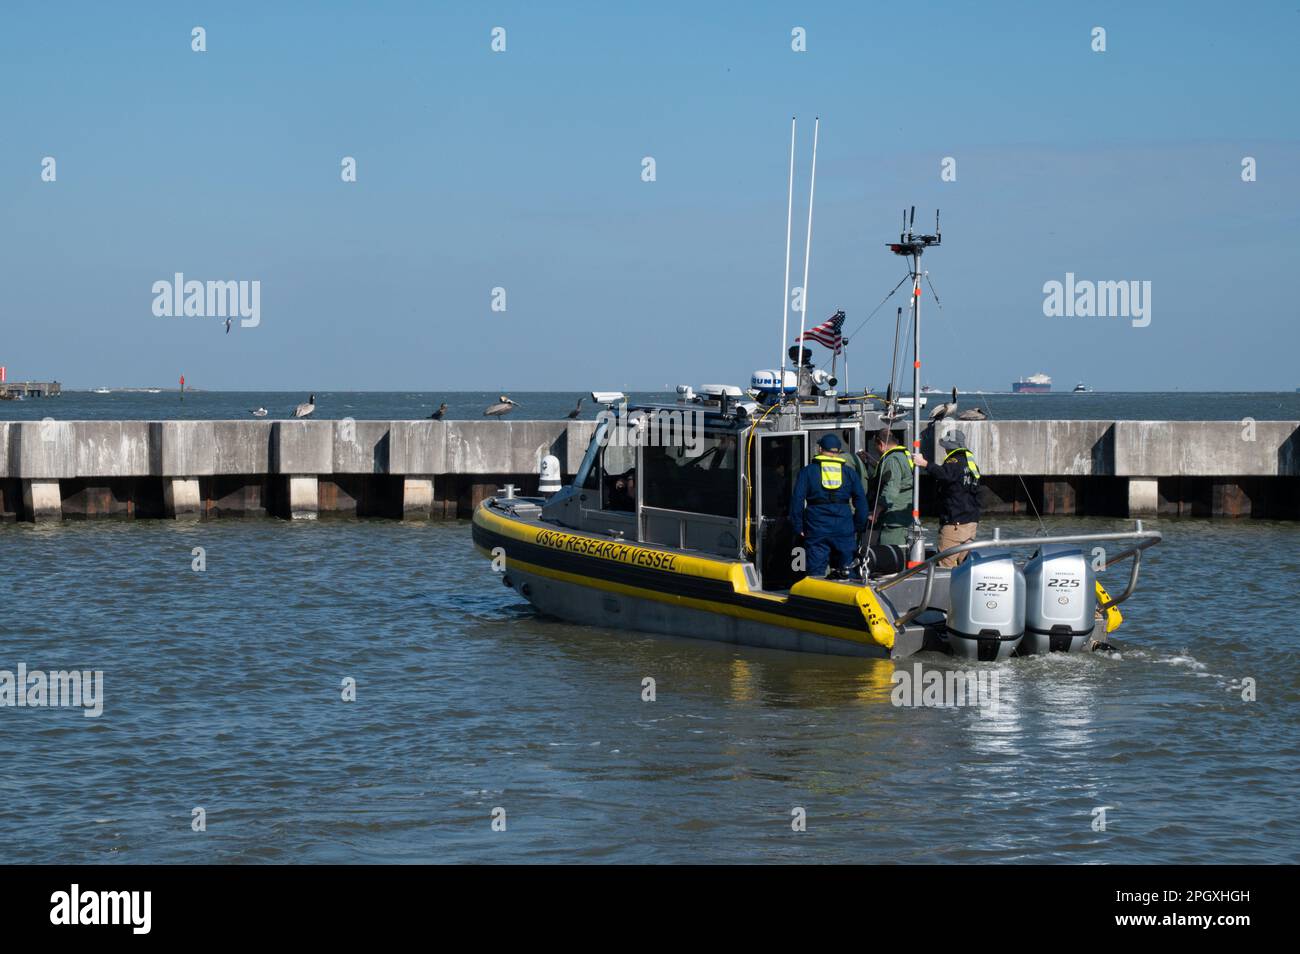 The R/V DOLPH, an autonomous vessel developed by the U.S. Coast Guard Research & Development Center (RDC), gets underway from the pier to conduct a demonstration at Coast Guard Base Galveston, Texas, Mar. 15, 2023. The R/V DOLPH is a 29-foot Response Boat-Small outfitted with a remote piloting system and has been in continuous development by the RDC with the hopes of developing a concept of operations for the integration of uncrewed surface vessels into Coast Guard missions. (U.S. Coast Guard photo by Petty Officer 3rd Class Alejandro Rivera) Stock Photo